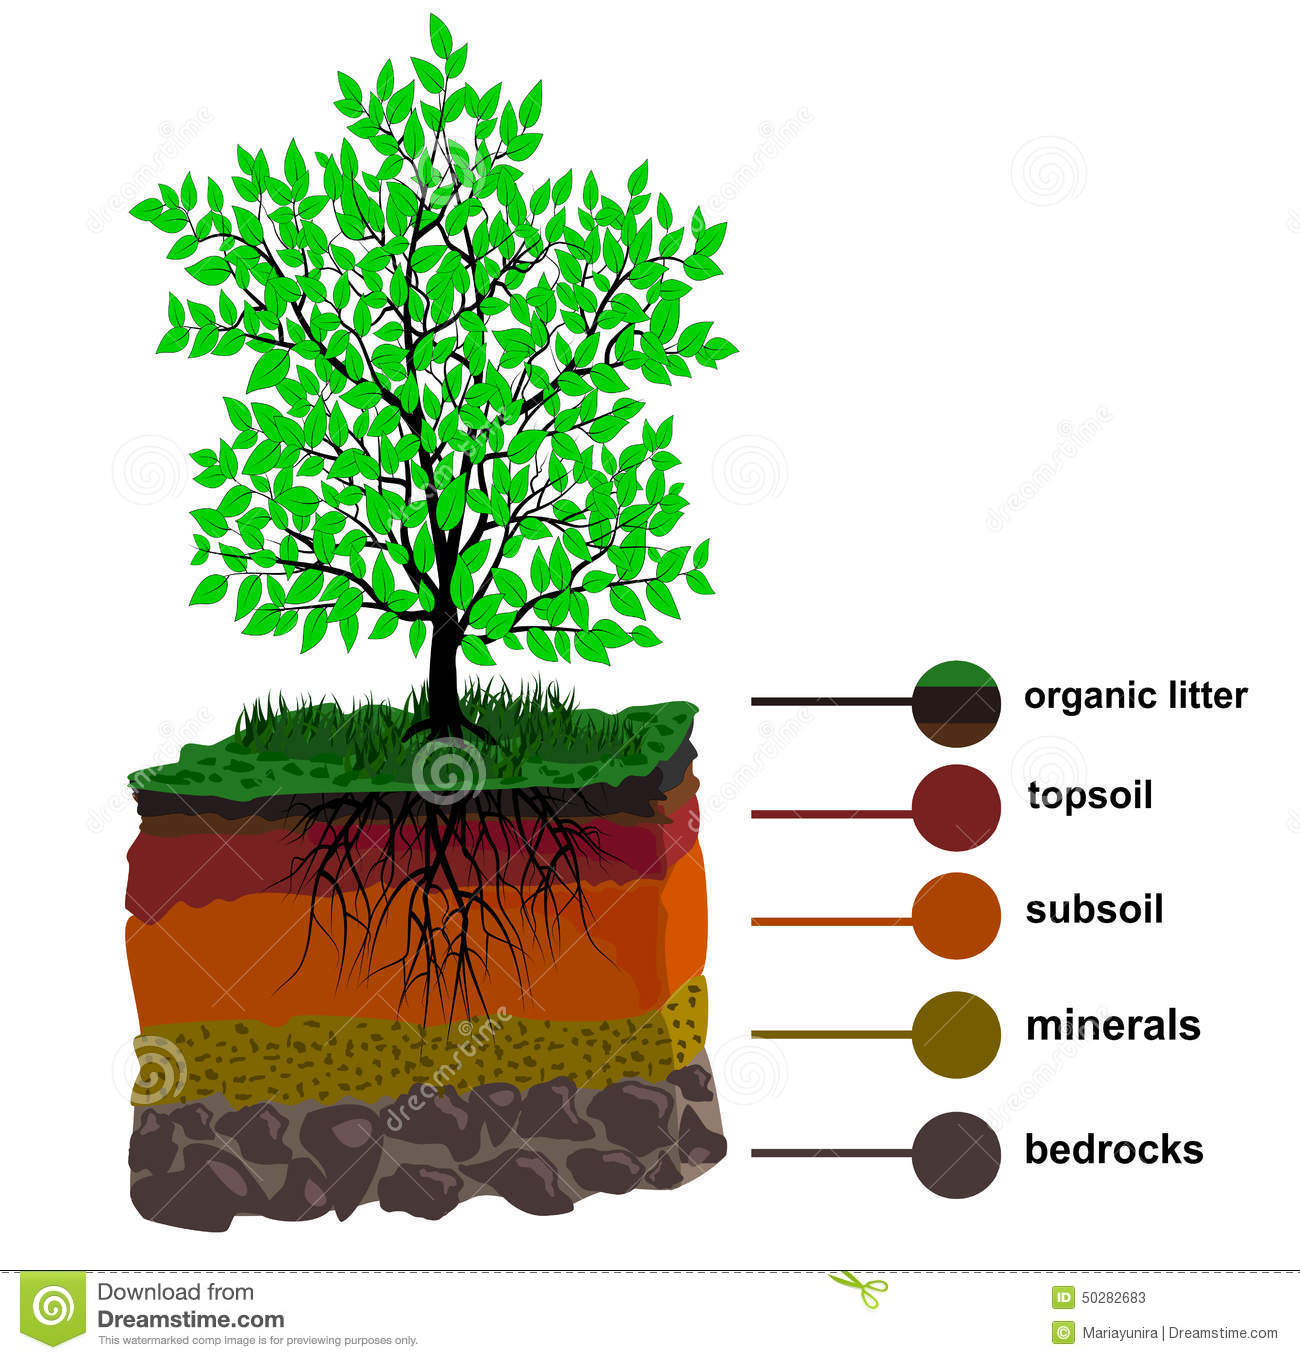 http://www.dreamstime.com/stock-illustration-soil-layer-tree-layers-horizon-form-isolated-vector-image50282683